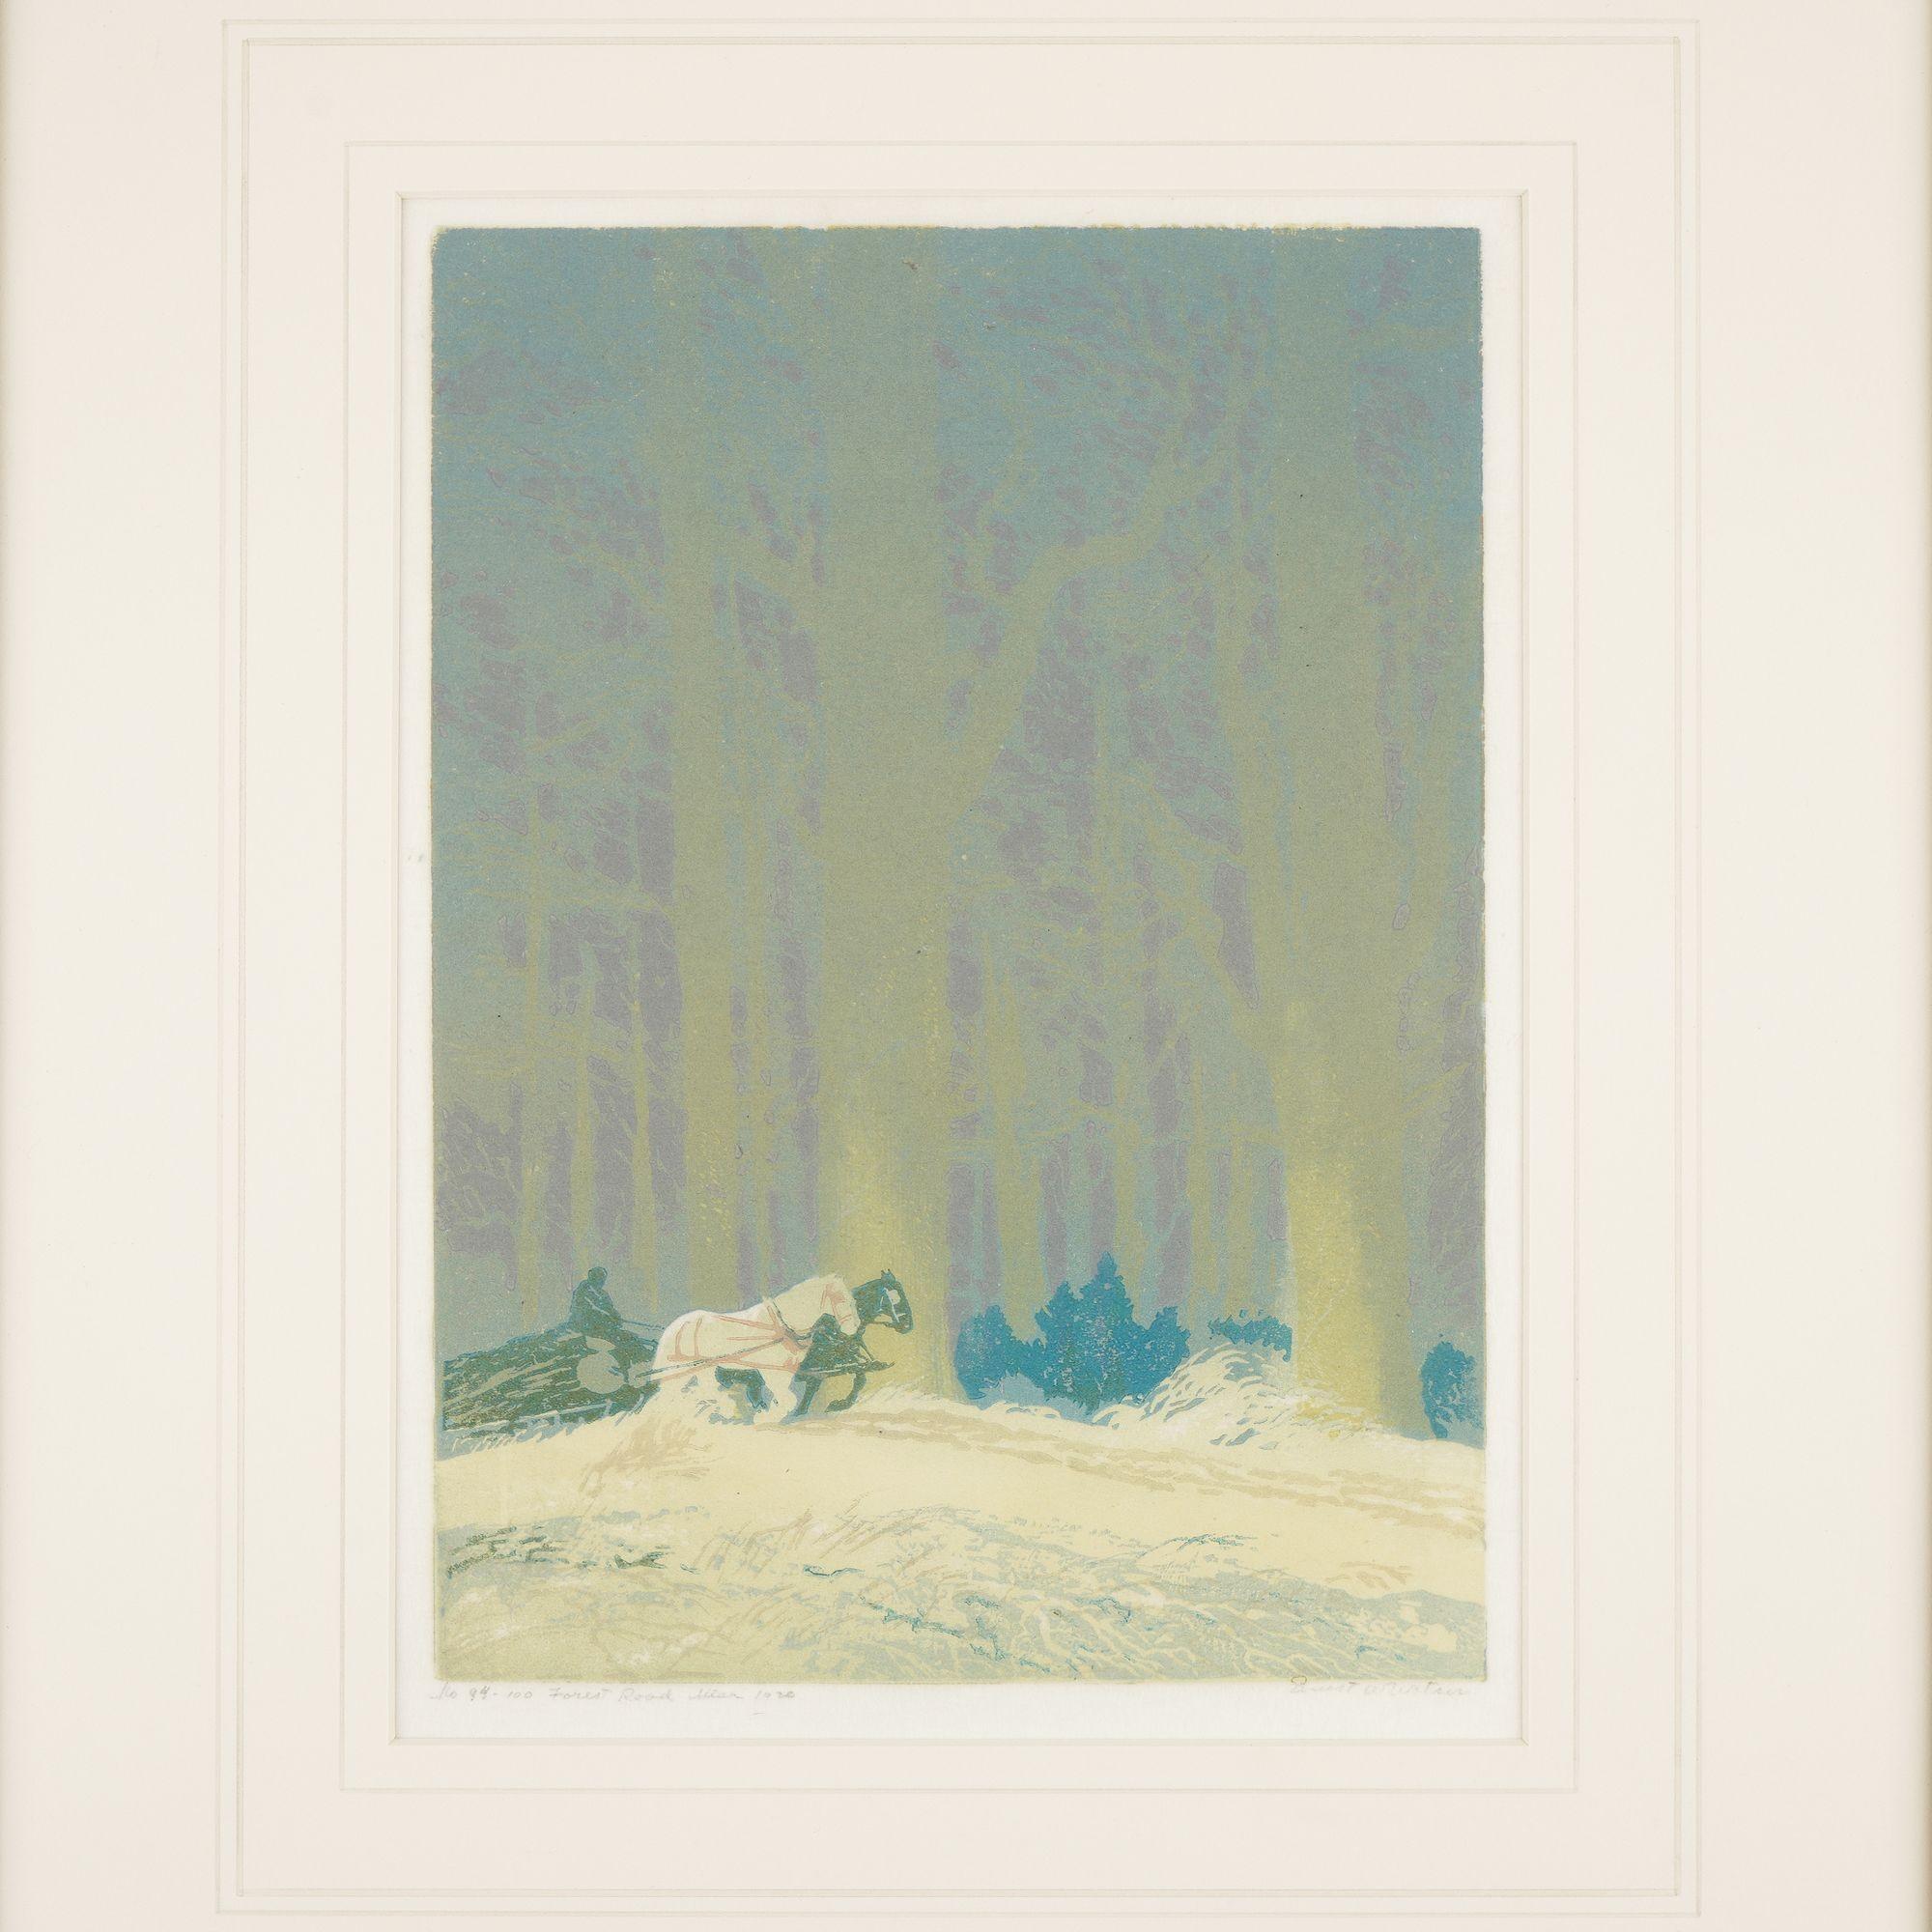 Linocut print on paper of a forest beyond on a field being plowed by horses. The light cream colored foreground is contrasted by a forest in the background, rendered in soft shades of green, purple, and blue. Archival mounted under UV glass in its